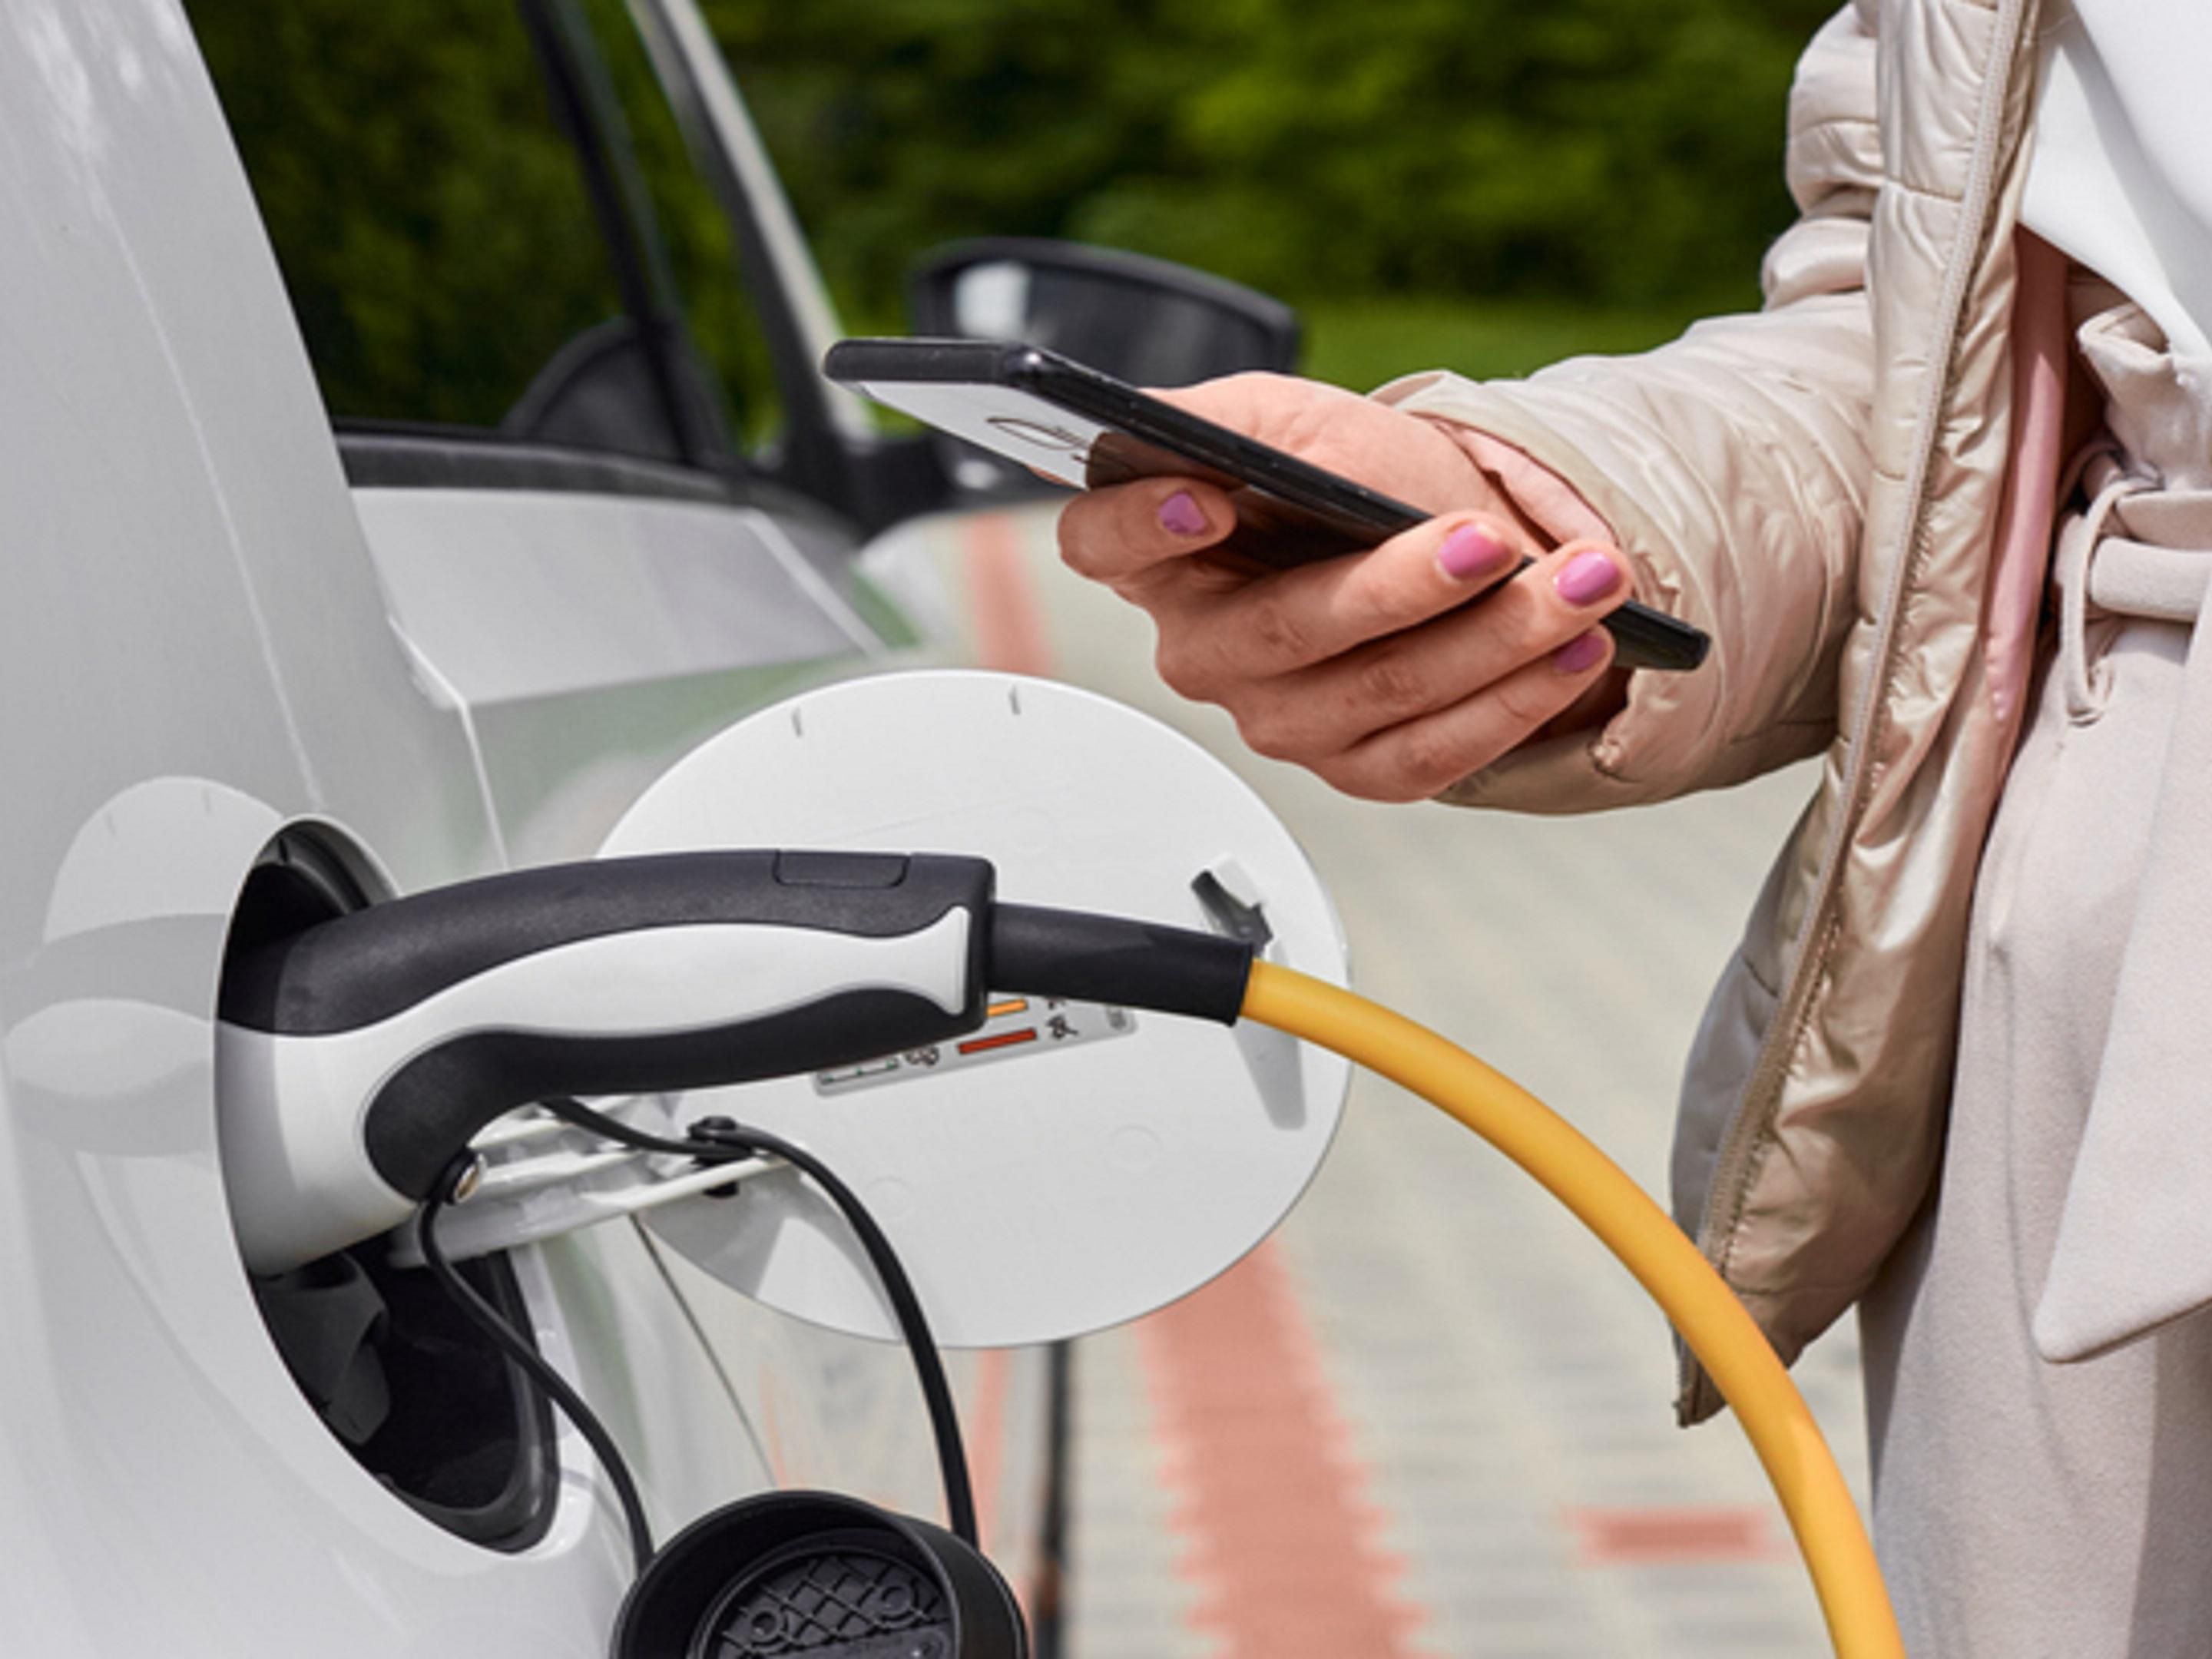 If you drive an electric vehicle, visit one of our convenient electronic charging stations during your stay. Charge is $0.40/kWh with a $3 hourly idle parking fee after charge complete. 